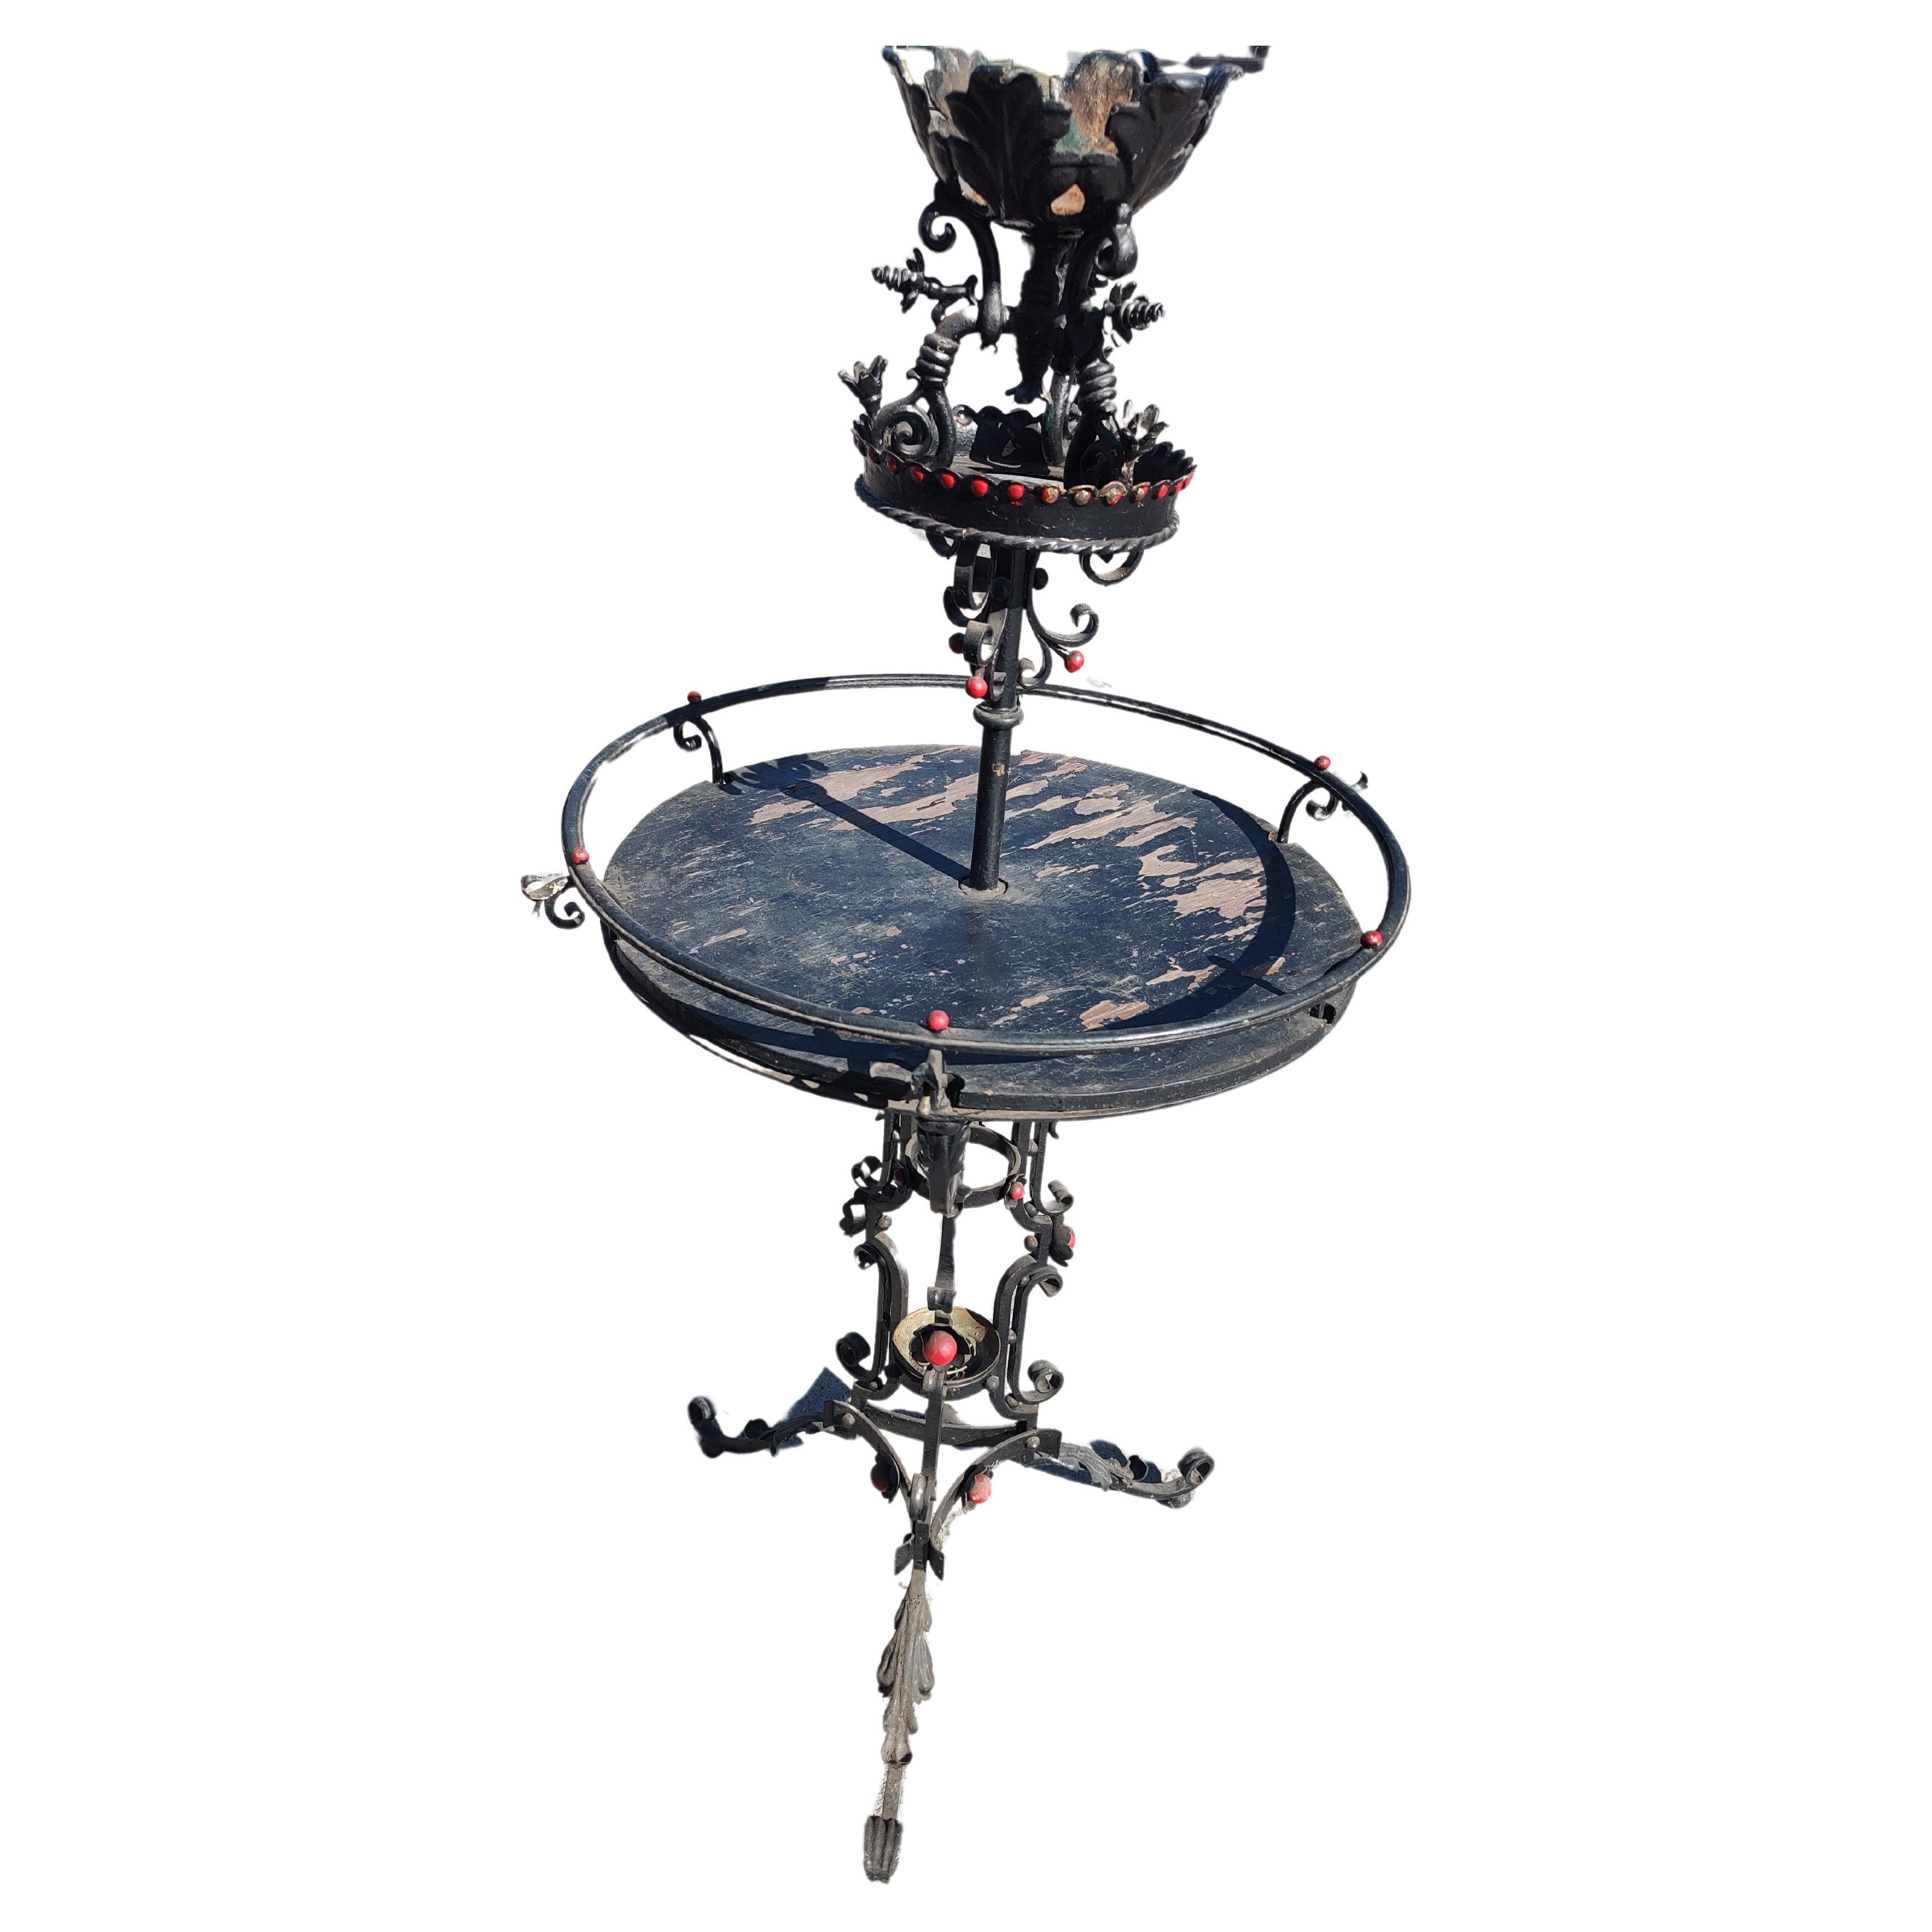 Fantastic large and ornate iron work in the style of Oscar Bach. A very decorative piece designed to hold many potted plants. A large round central element which is supported by an iron frame and a piece of hardwood which would support many potted